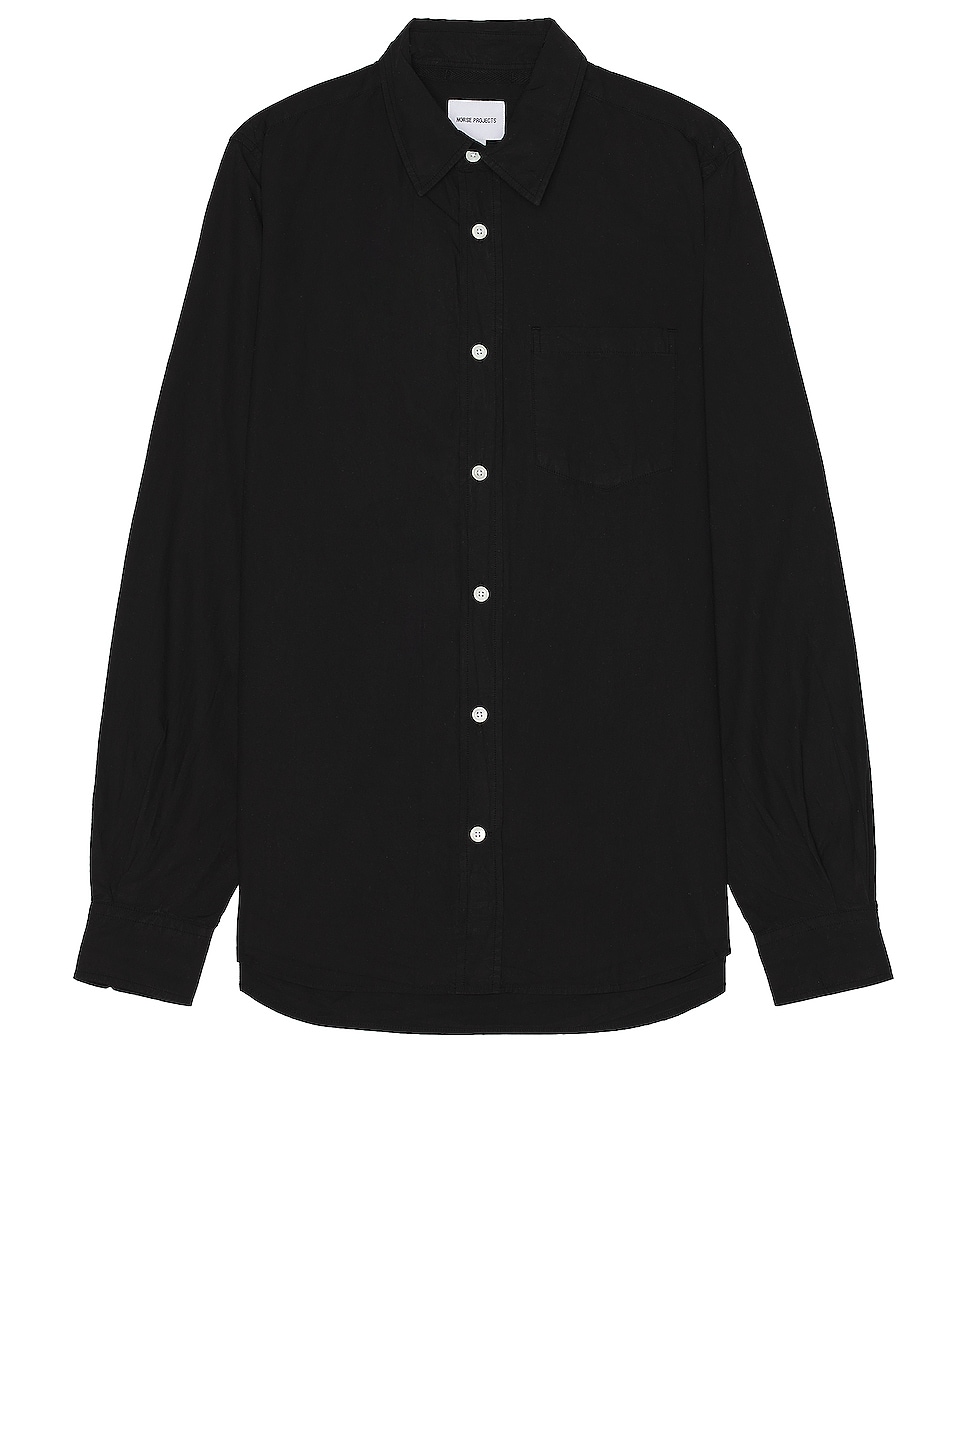 Image 1 of Norse Projects Osvald Cotton Tencel Shirt in Black